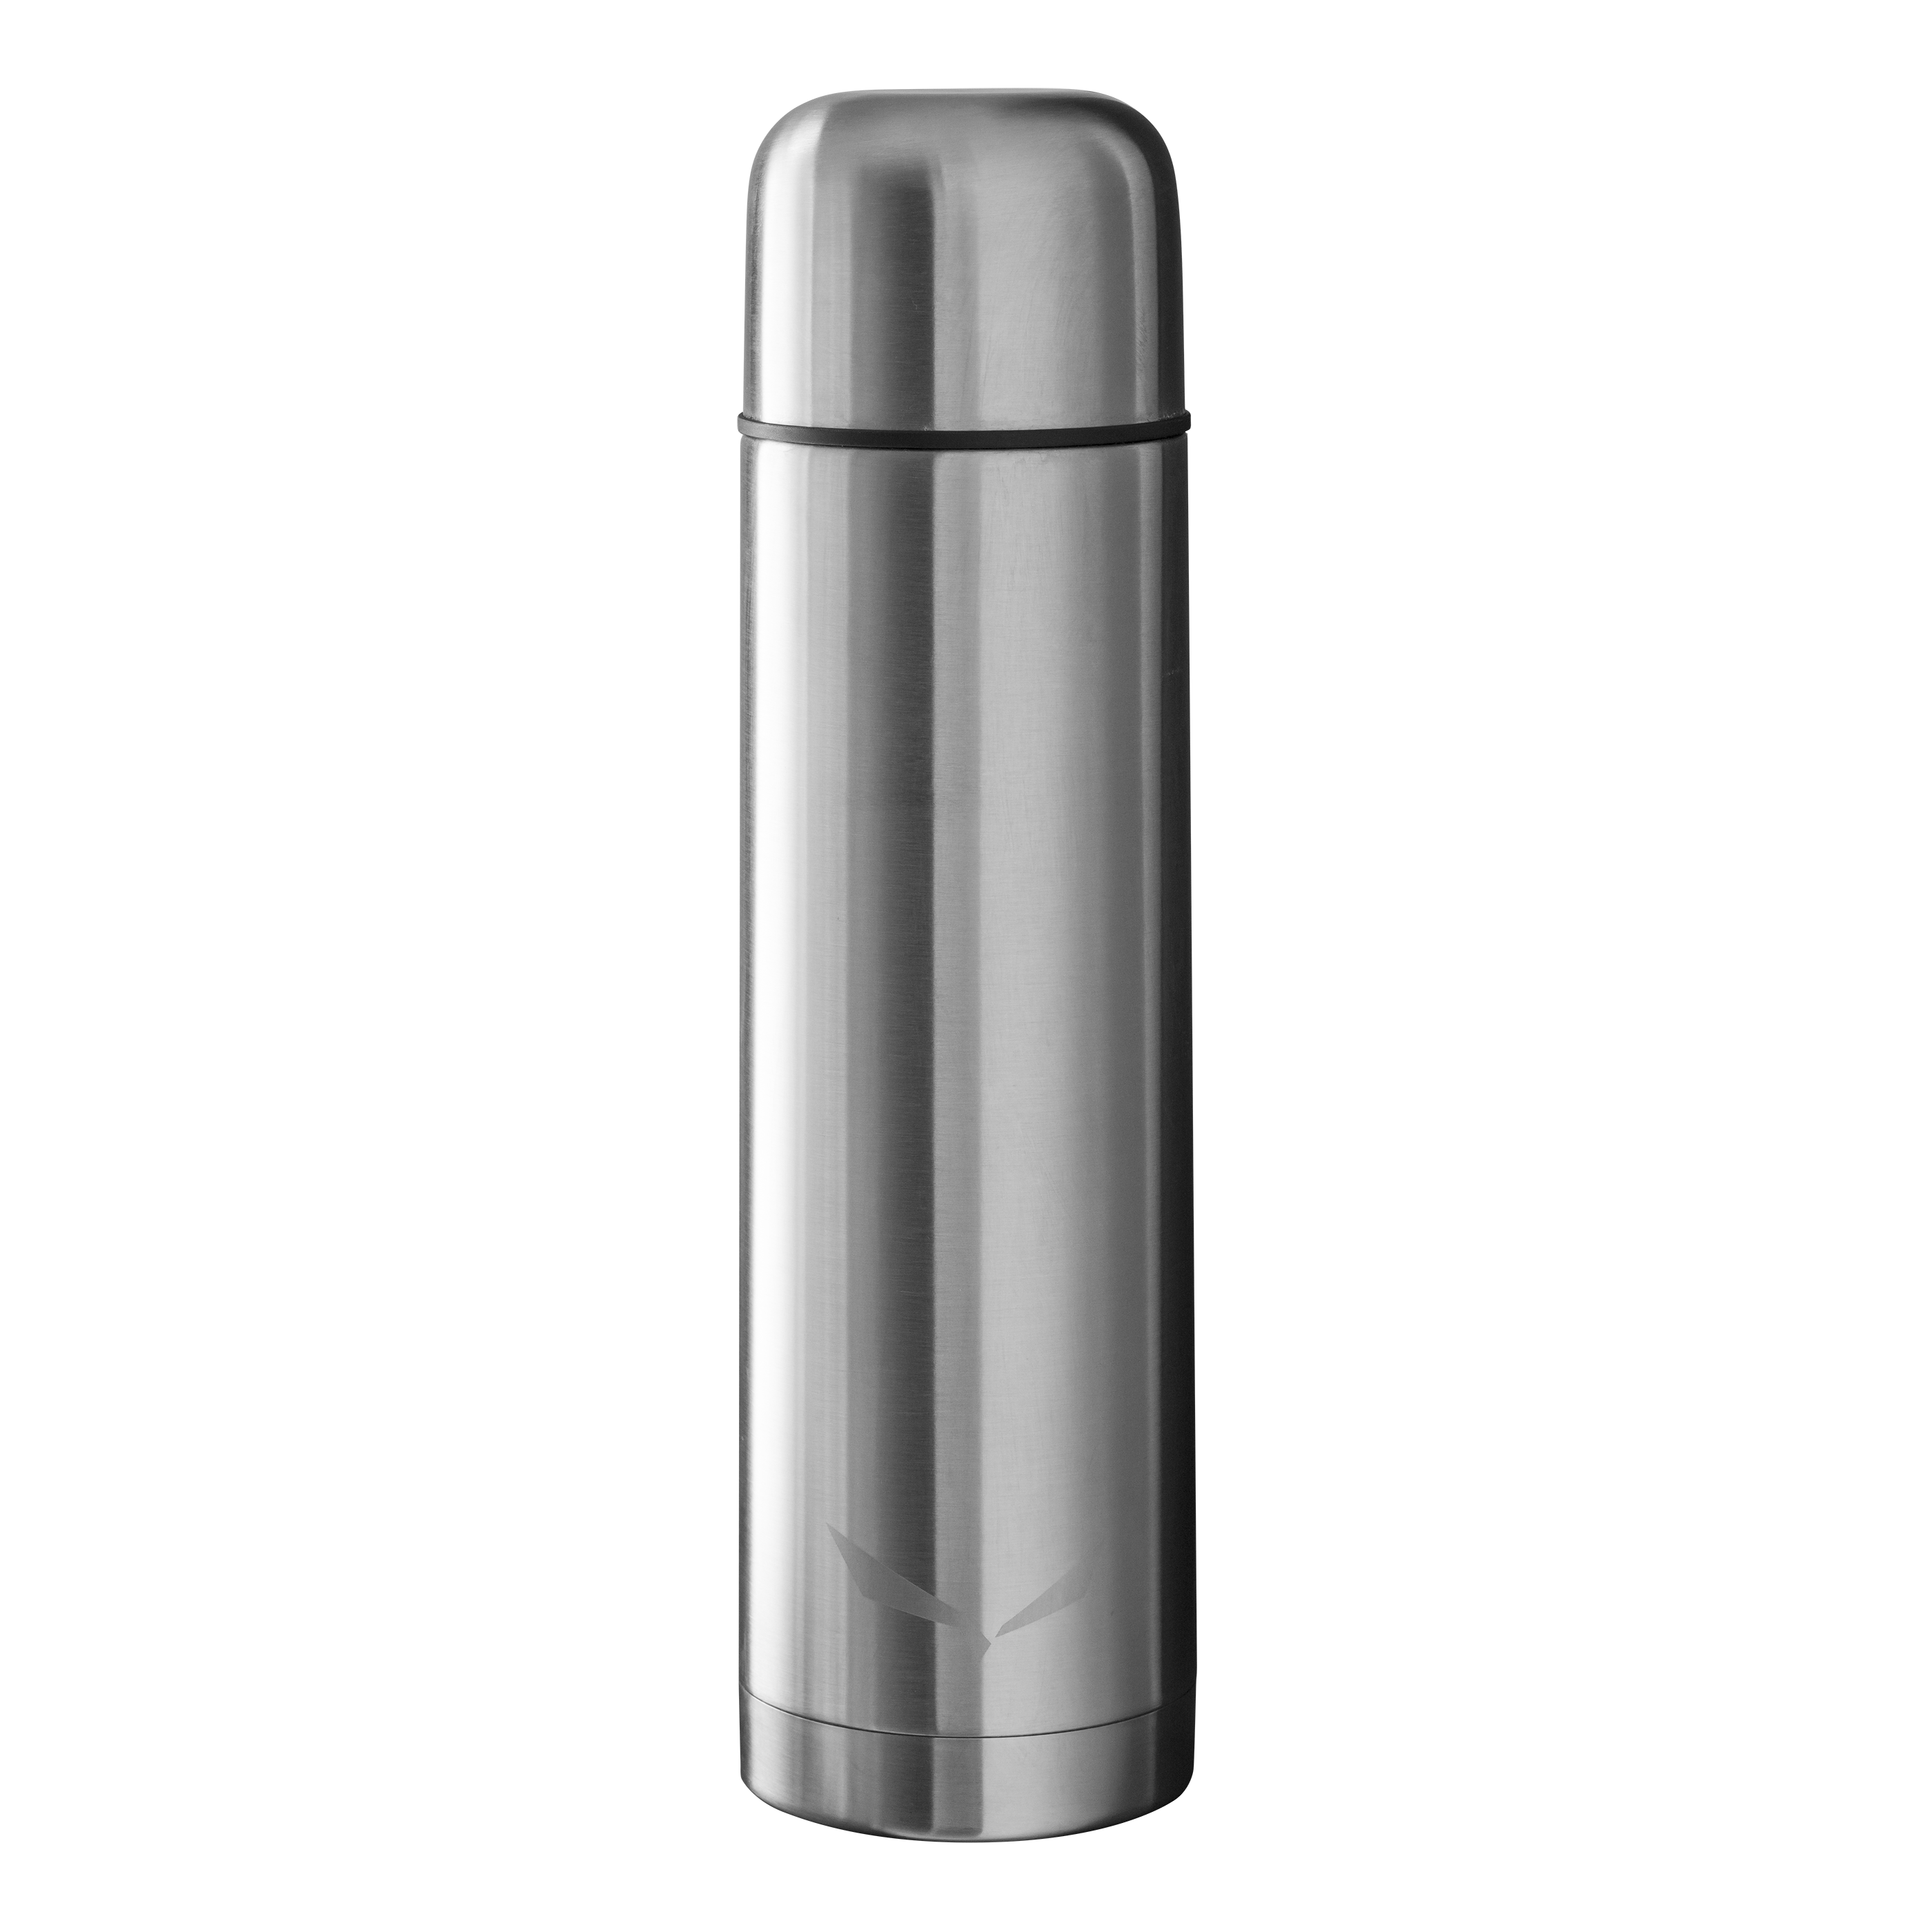 RIENZA THERMO STAINLESS STEEL 1,0L BOTTLE